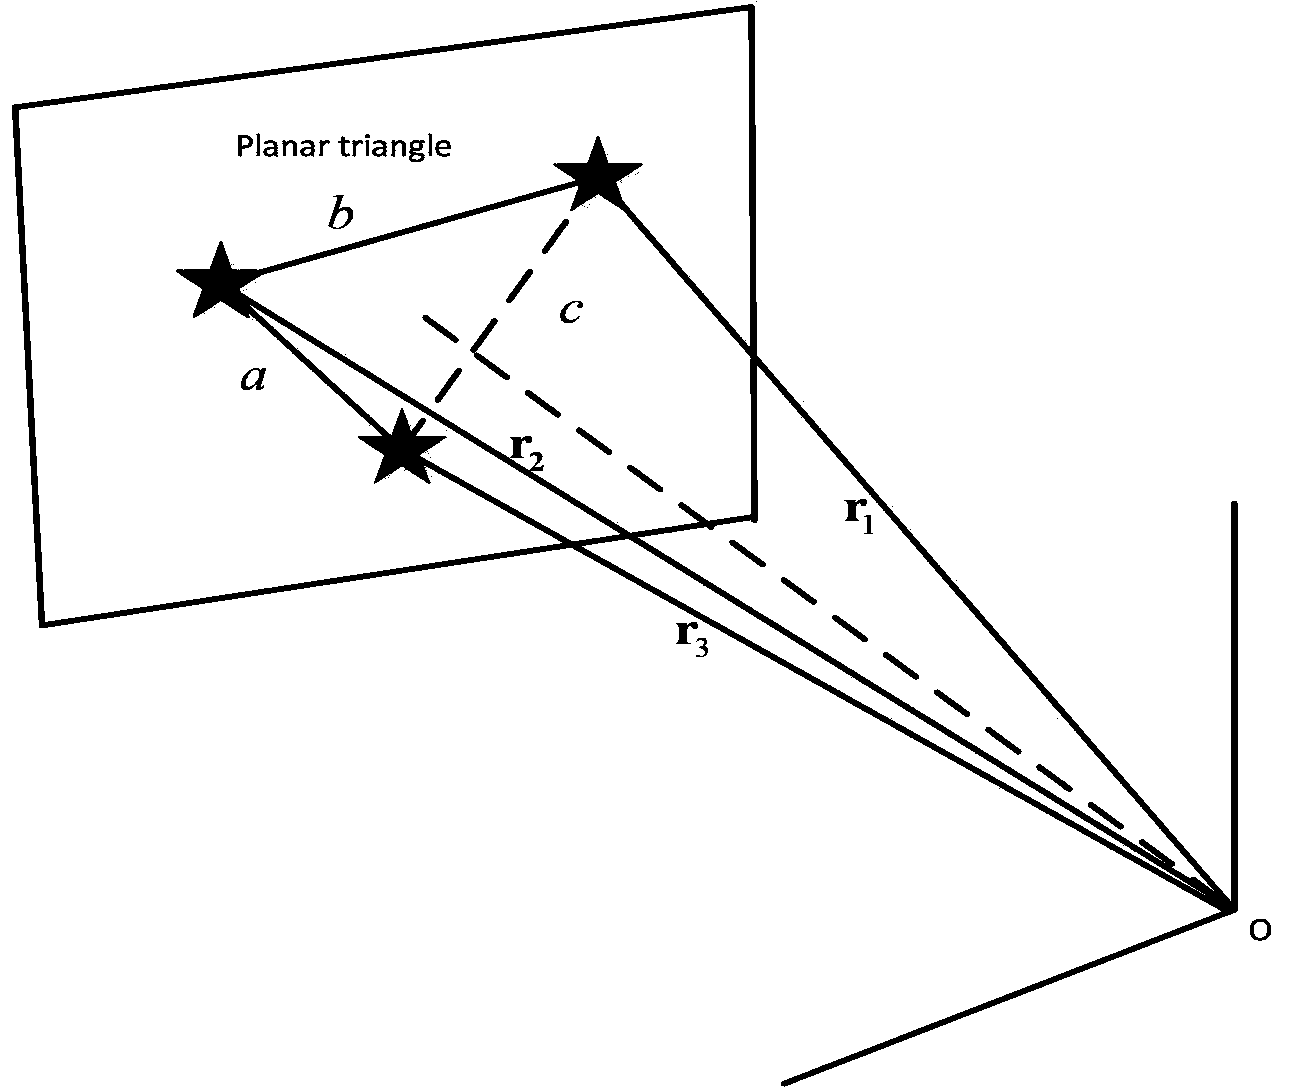 Star pattern recognition method based on principal component analysis of plane triangles